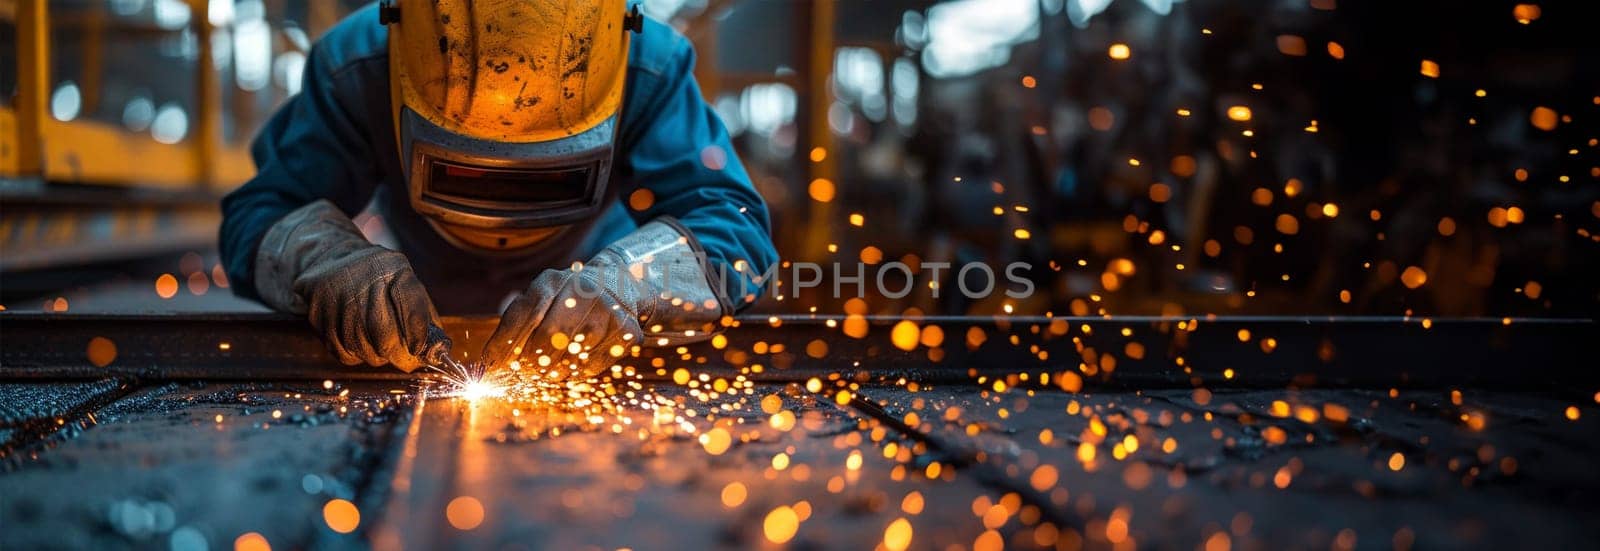 Proffessional welder at work. Handymen performing welding and grinding at their workplace in the workshop, while the sparks "fly" all around them, they wear a protective helmet and equipment. Sparkling lights by Annebel146